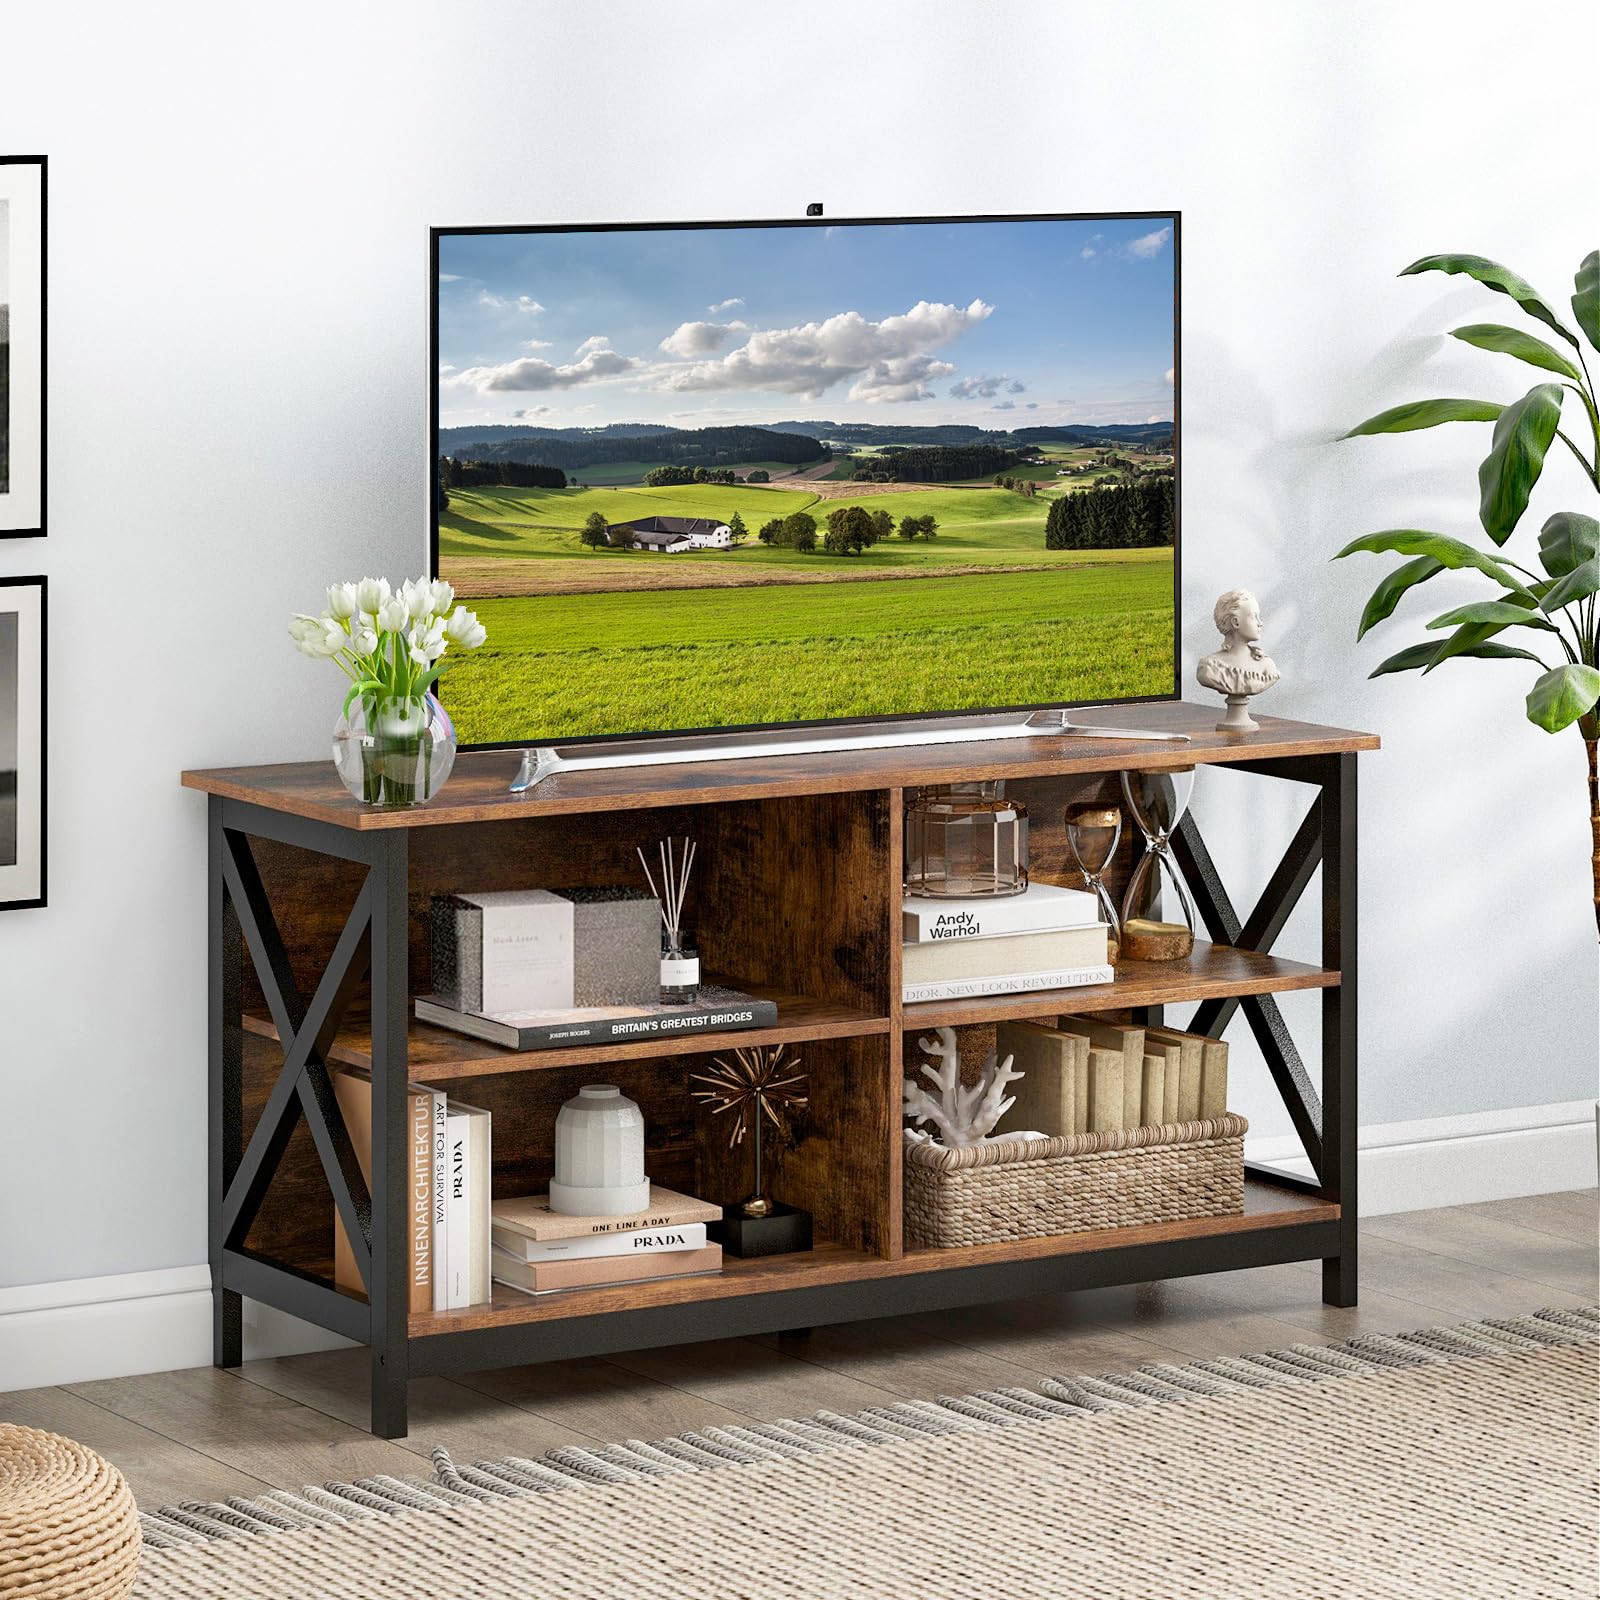 Giantex TV Stands for Living Room - 3-Tier Media Console Table with Storage Shelves